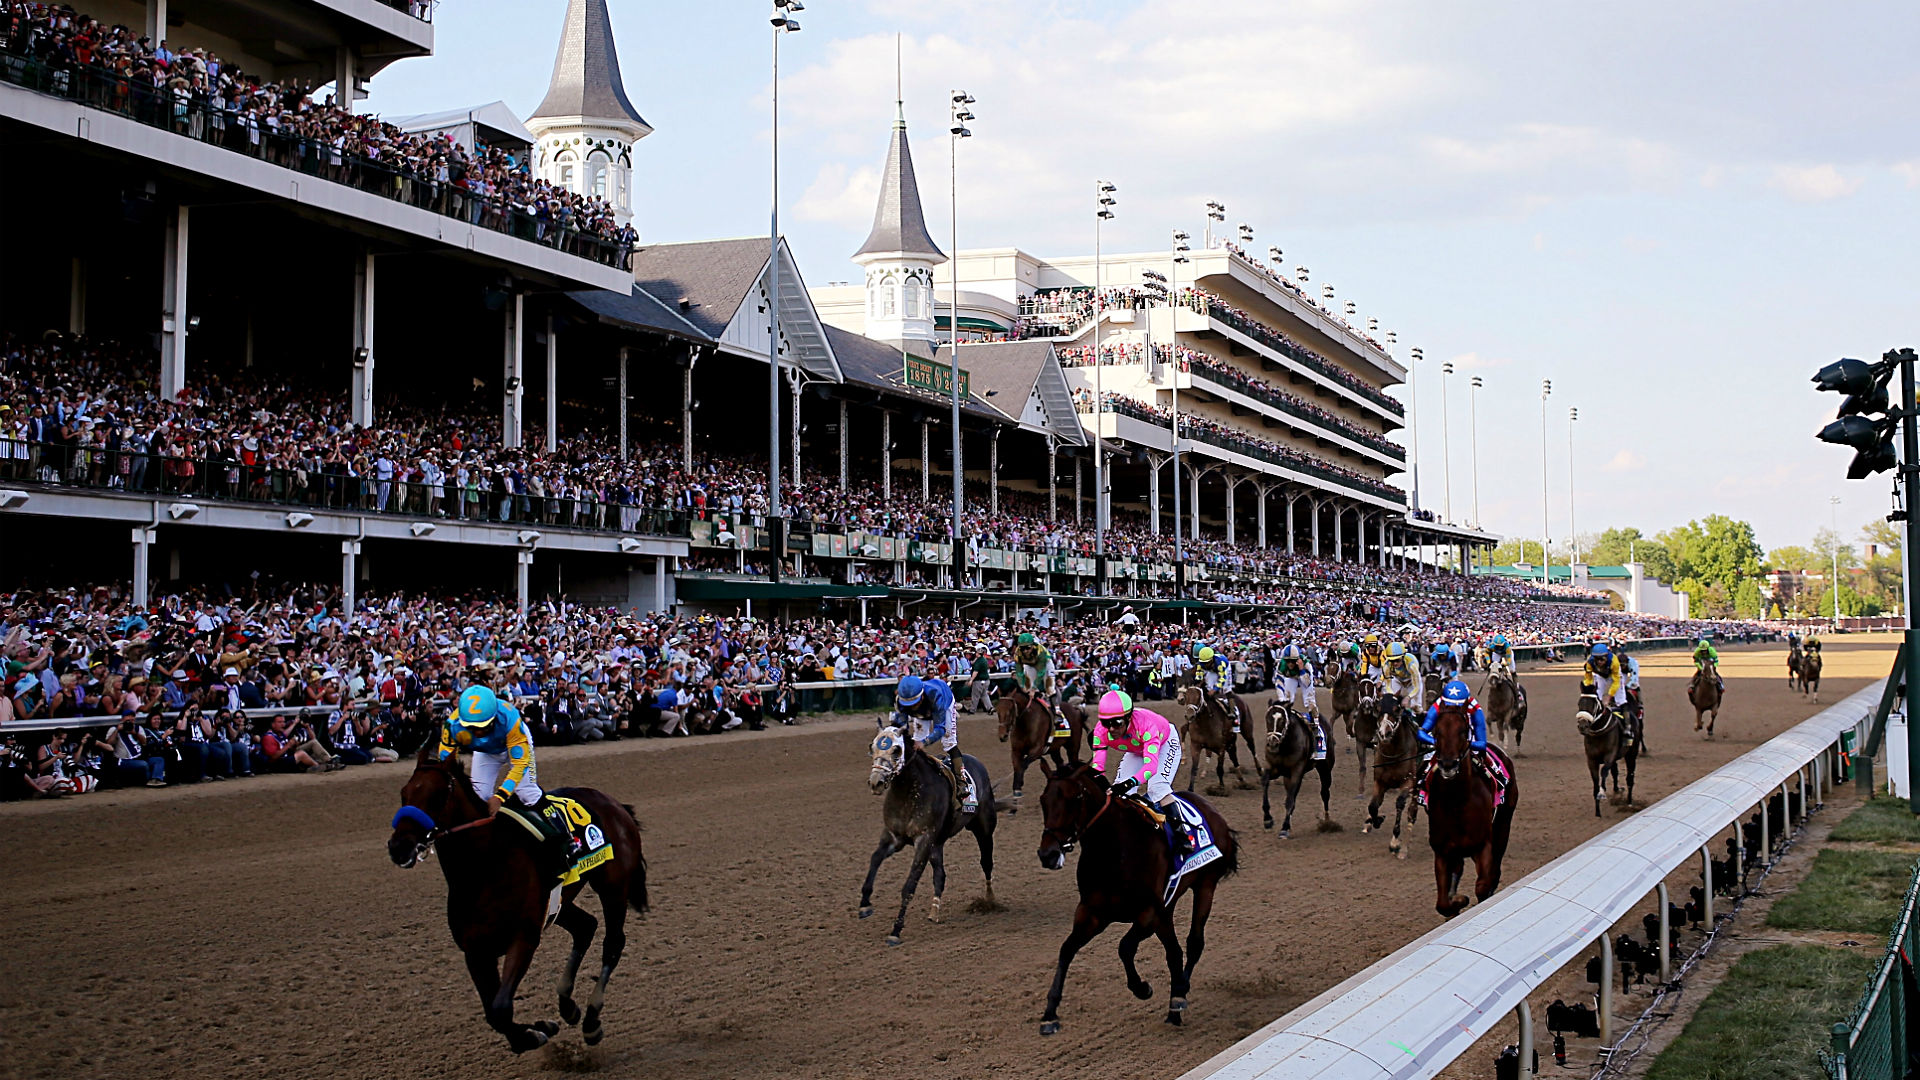 When Is Kentucky Derby 2016 Time Day Date Tv Schedule Odds Field Contenders Horsesjpg 689evet48ezw16h7edlsq2rvf ?t= 244934333